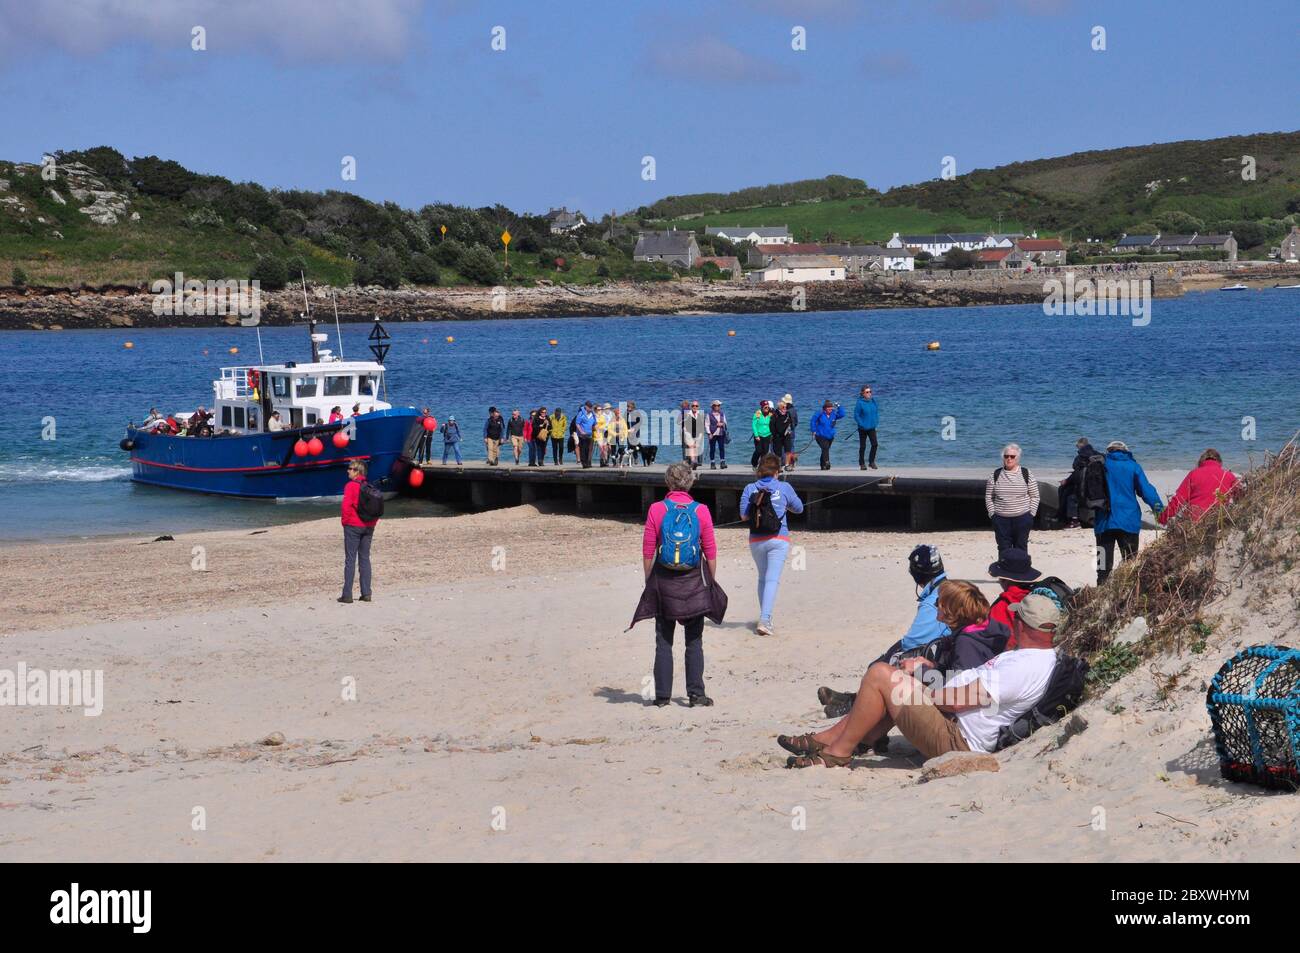 The inter island boat 'Voyager' belonging to the island of St Martin's, disembarking  passengers at Annake's Quay on Bryer,while tourists wait on the Stock Photo